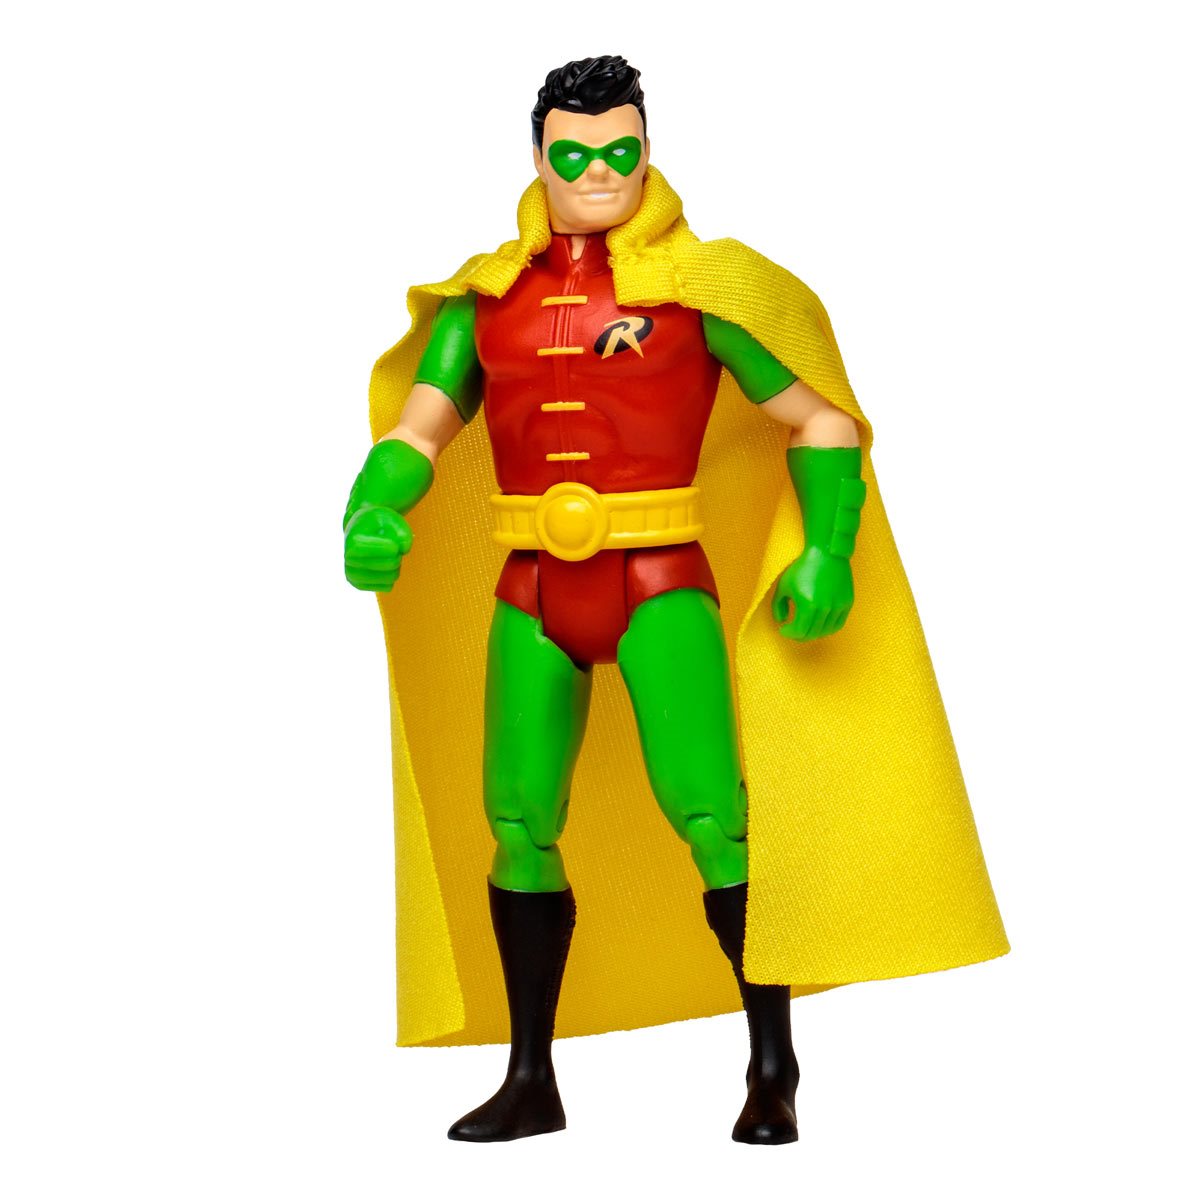 DC Super Powers Wave 4 Robin Tim Drake 4-Inch Scale Action Figure